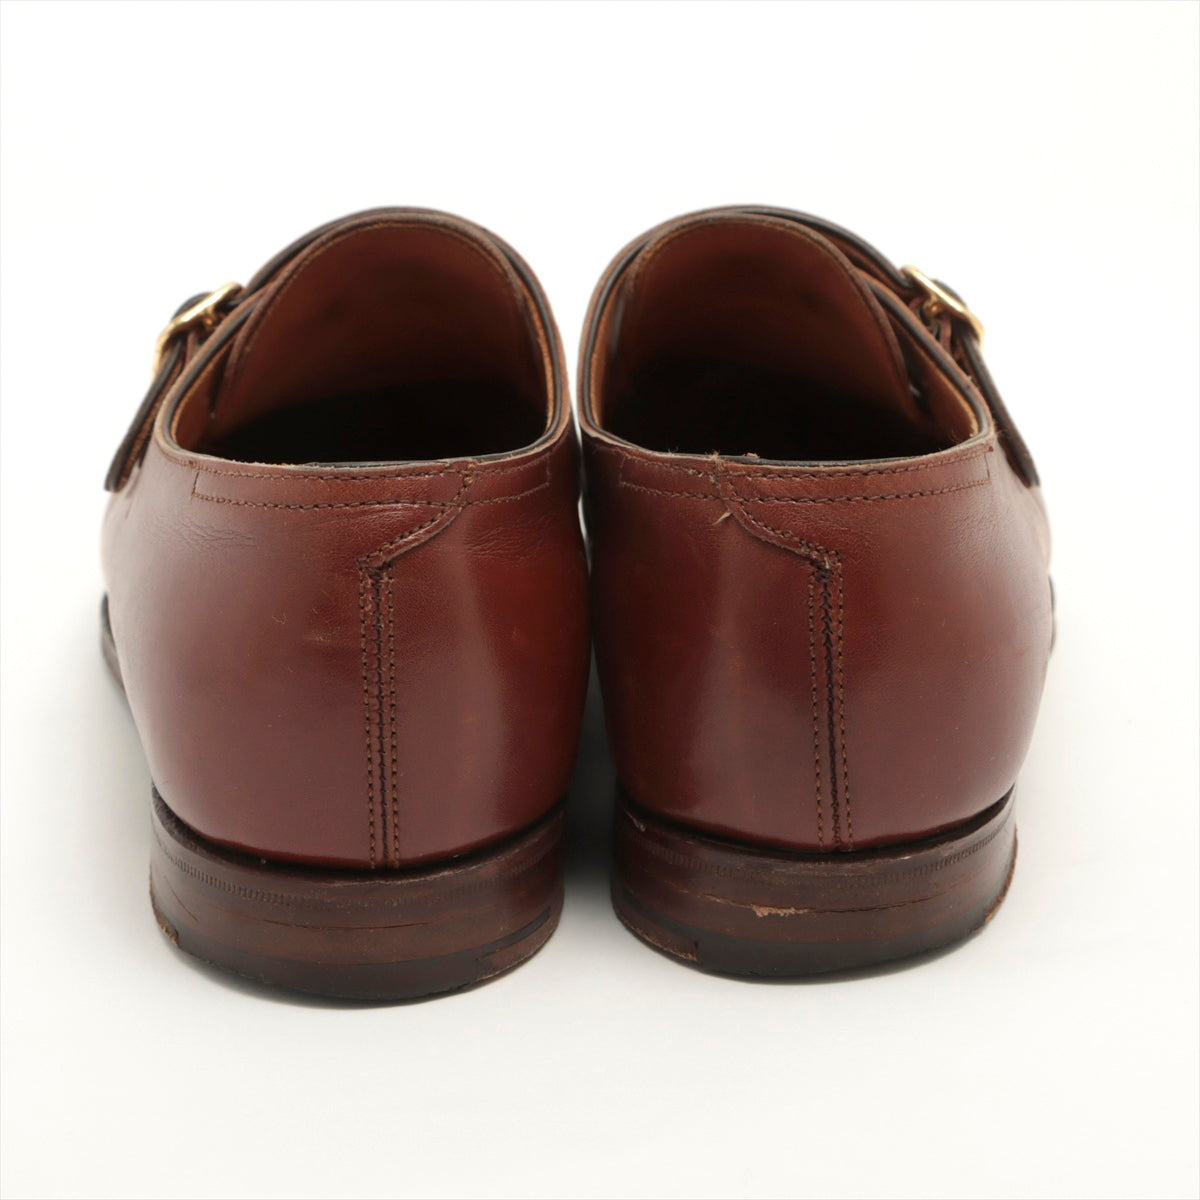 John Lobb Leather Leather shoes 70C Men's Brown 9063 OSNER